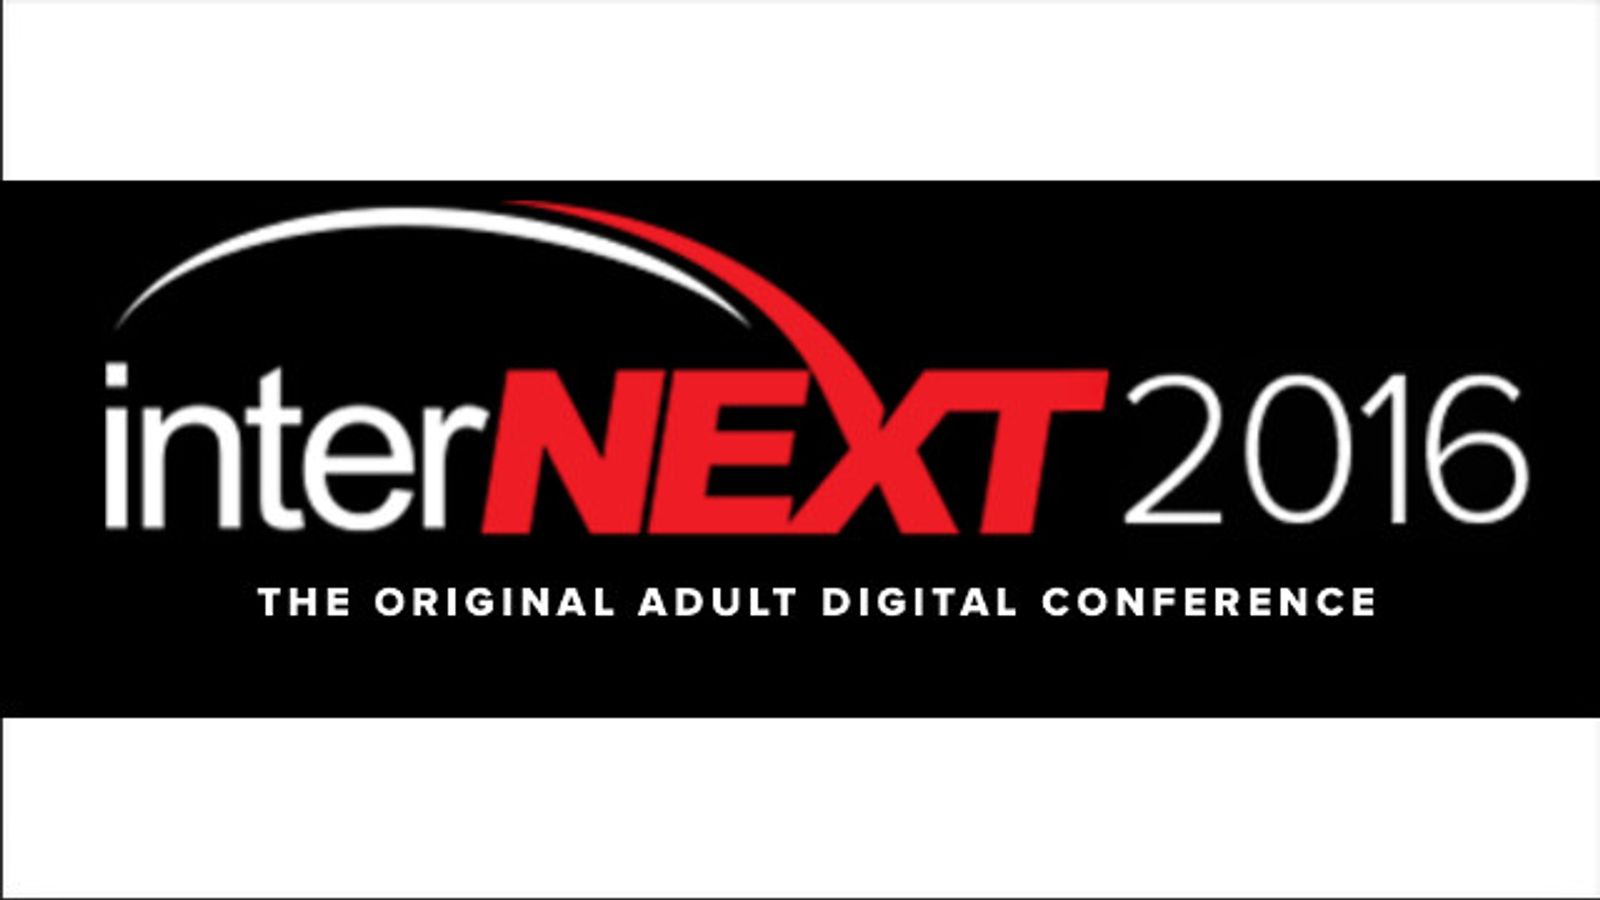 Industry Leaders Talk Technology on Day 3 of Internext